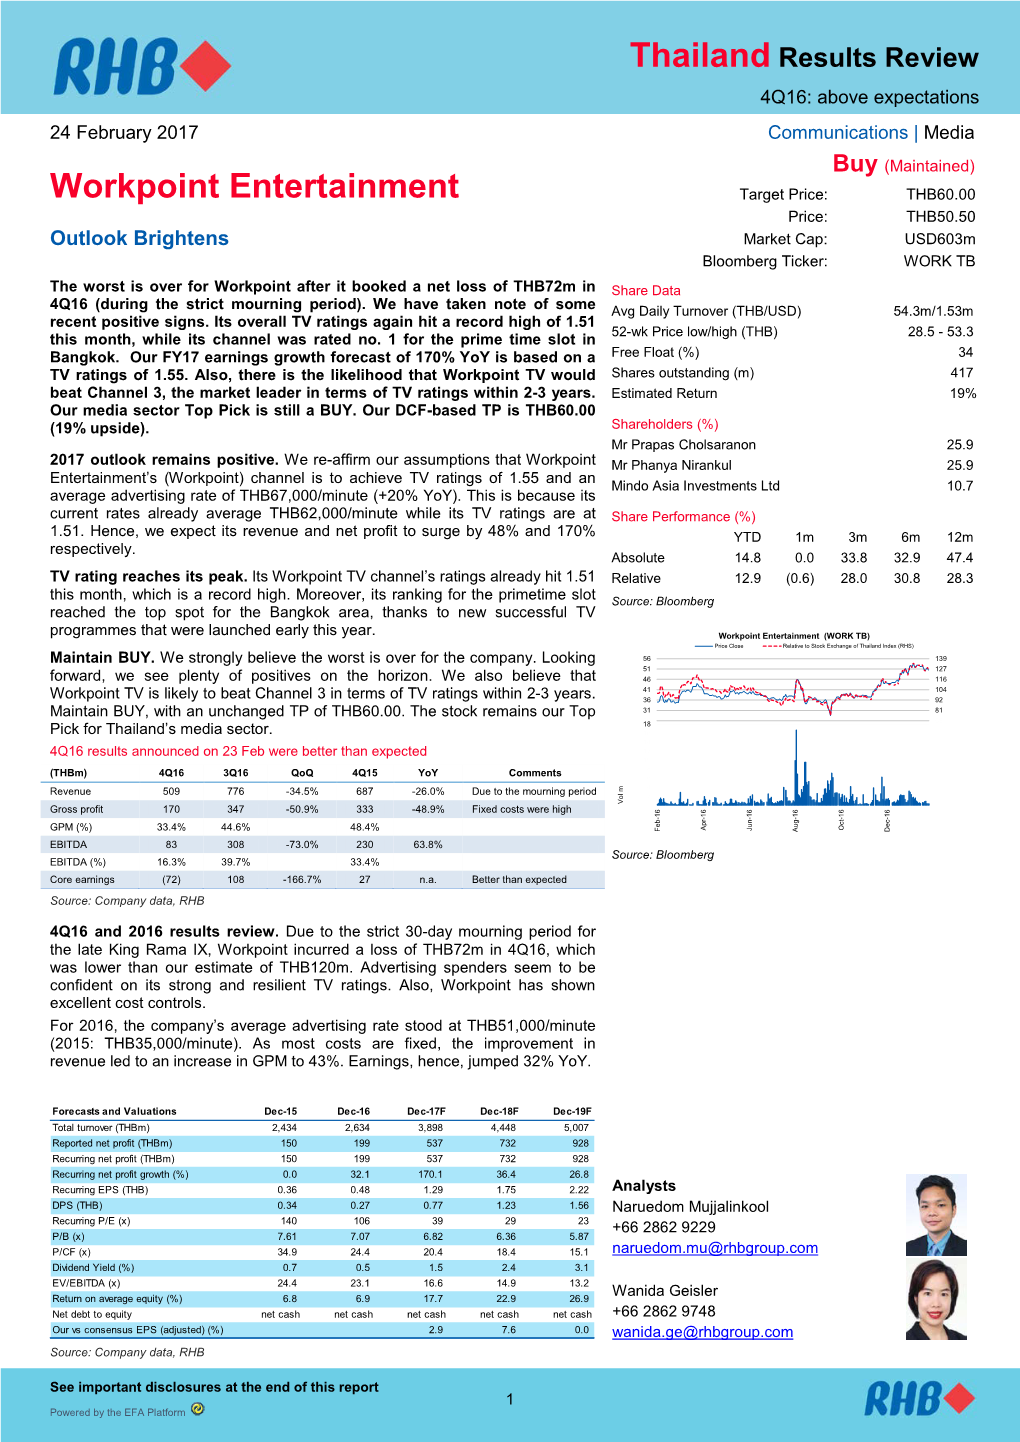 Workpoint Entertainment Target Price: THB60.00 Price: THB50.50 Outlook Brightens Market Cap: Usd603m Bloomberg Ticker: WORK TB